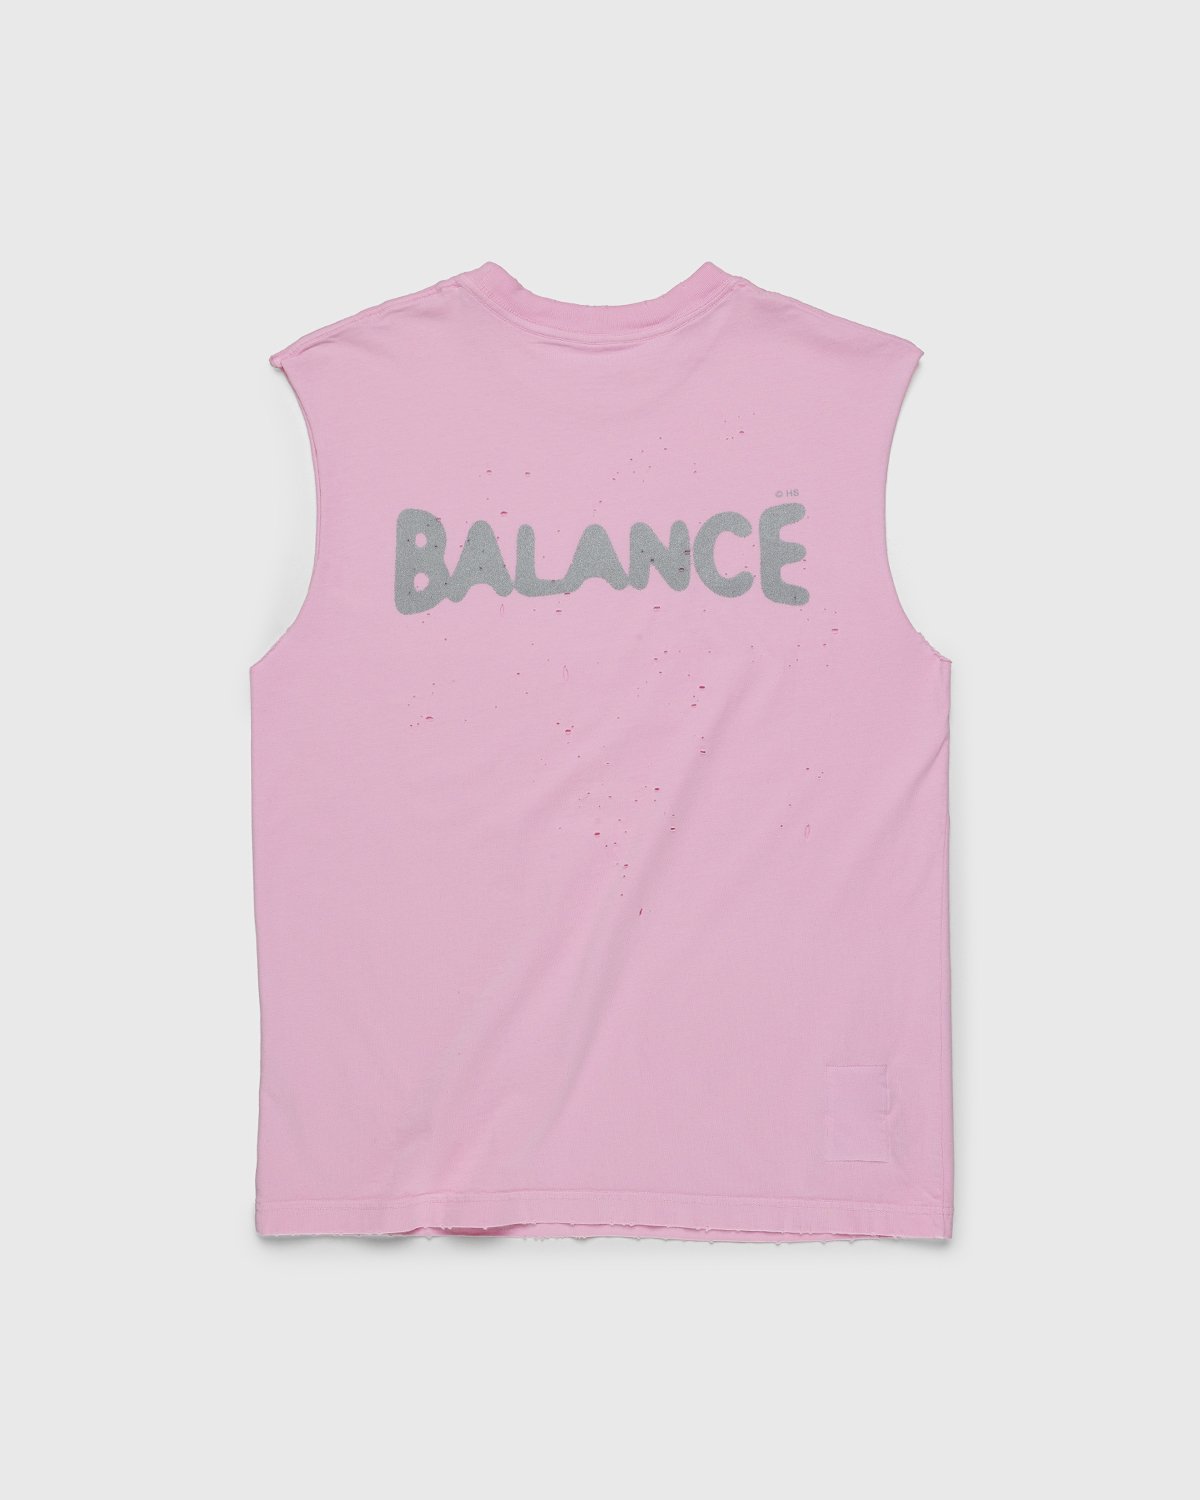 Satisfy x Highsnobiety - HS Sports Balance Muscle Tee Pink - Clothing - Pink - Image 2